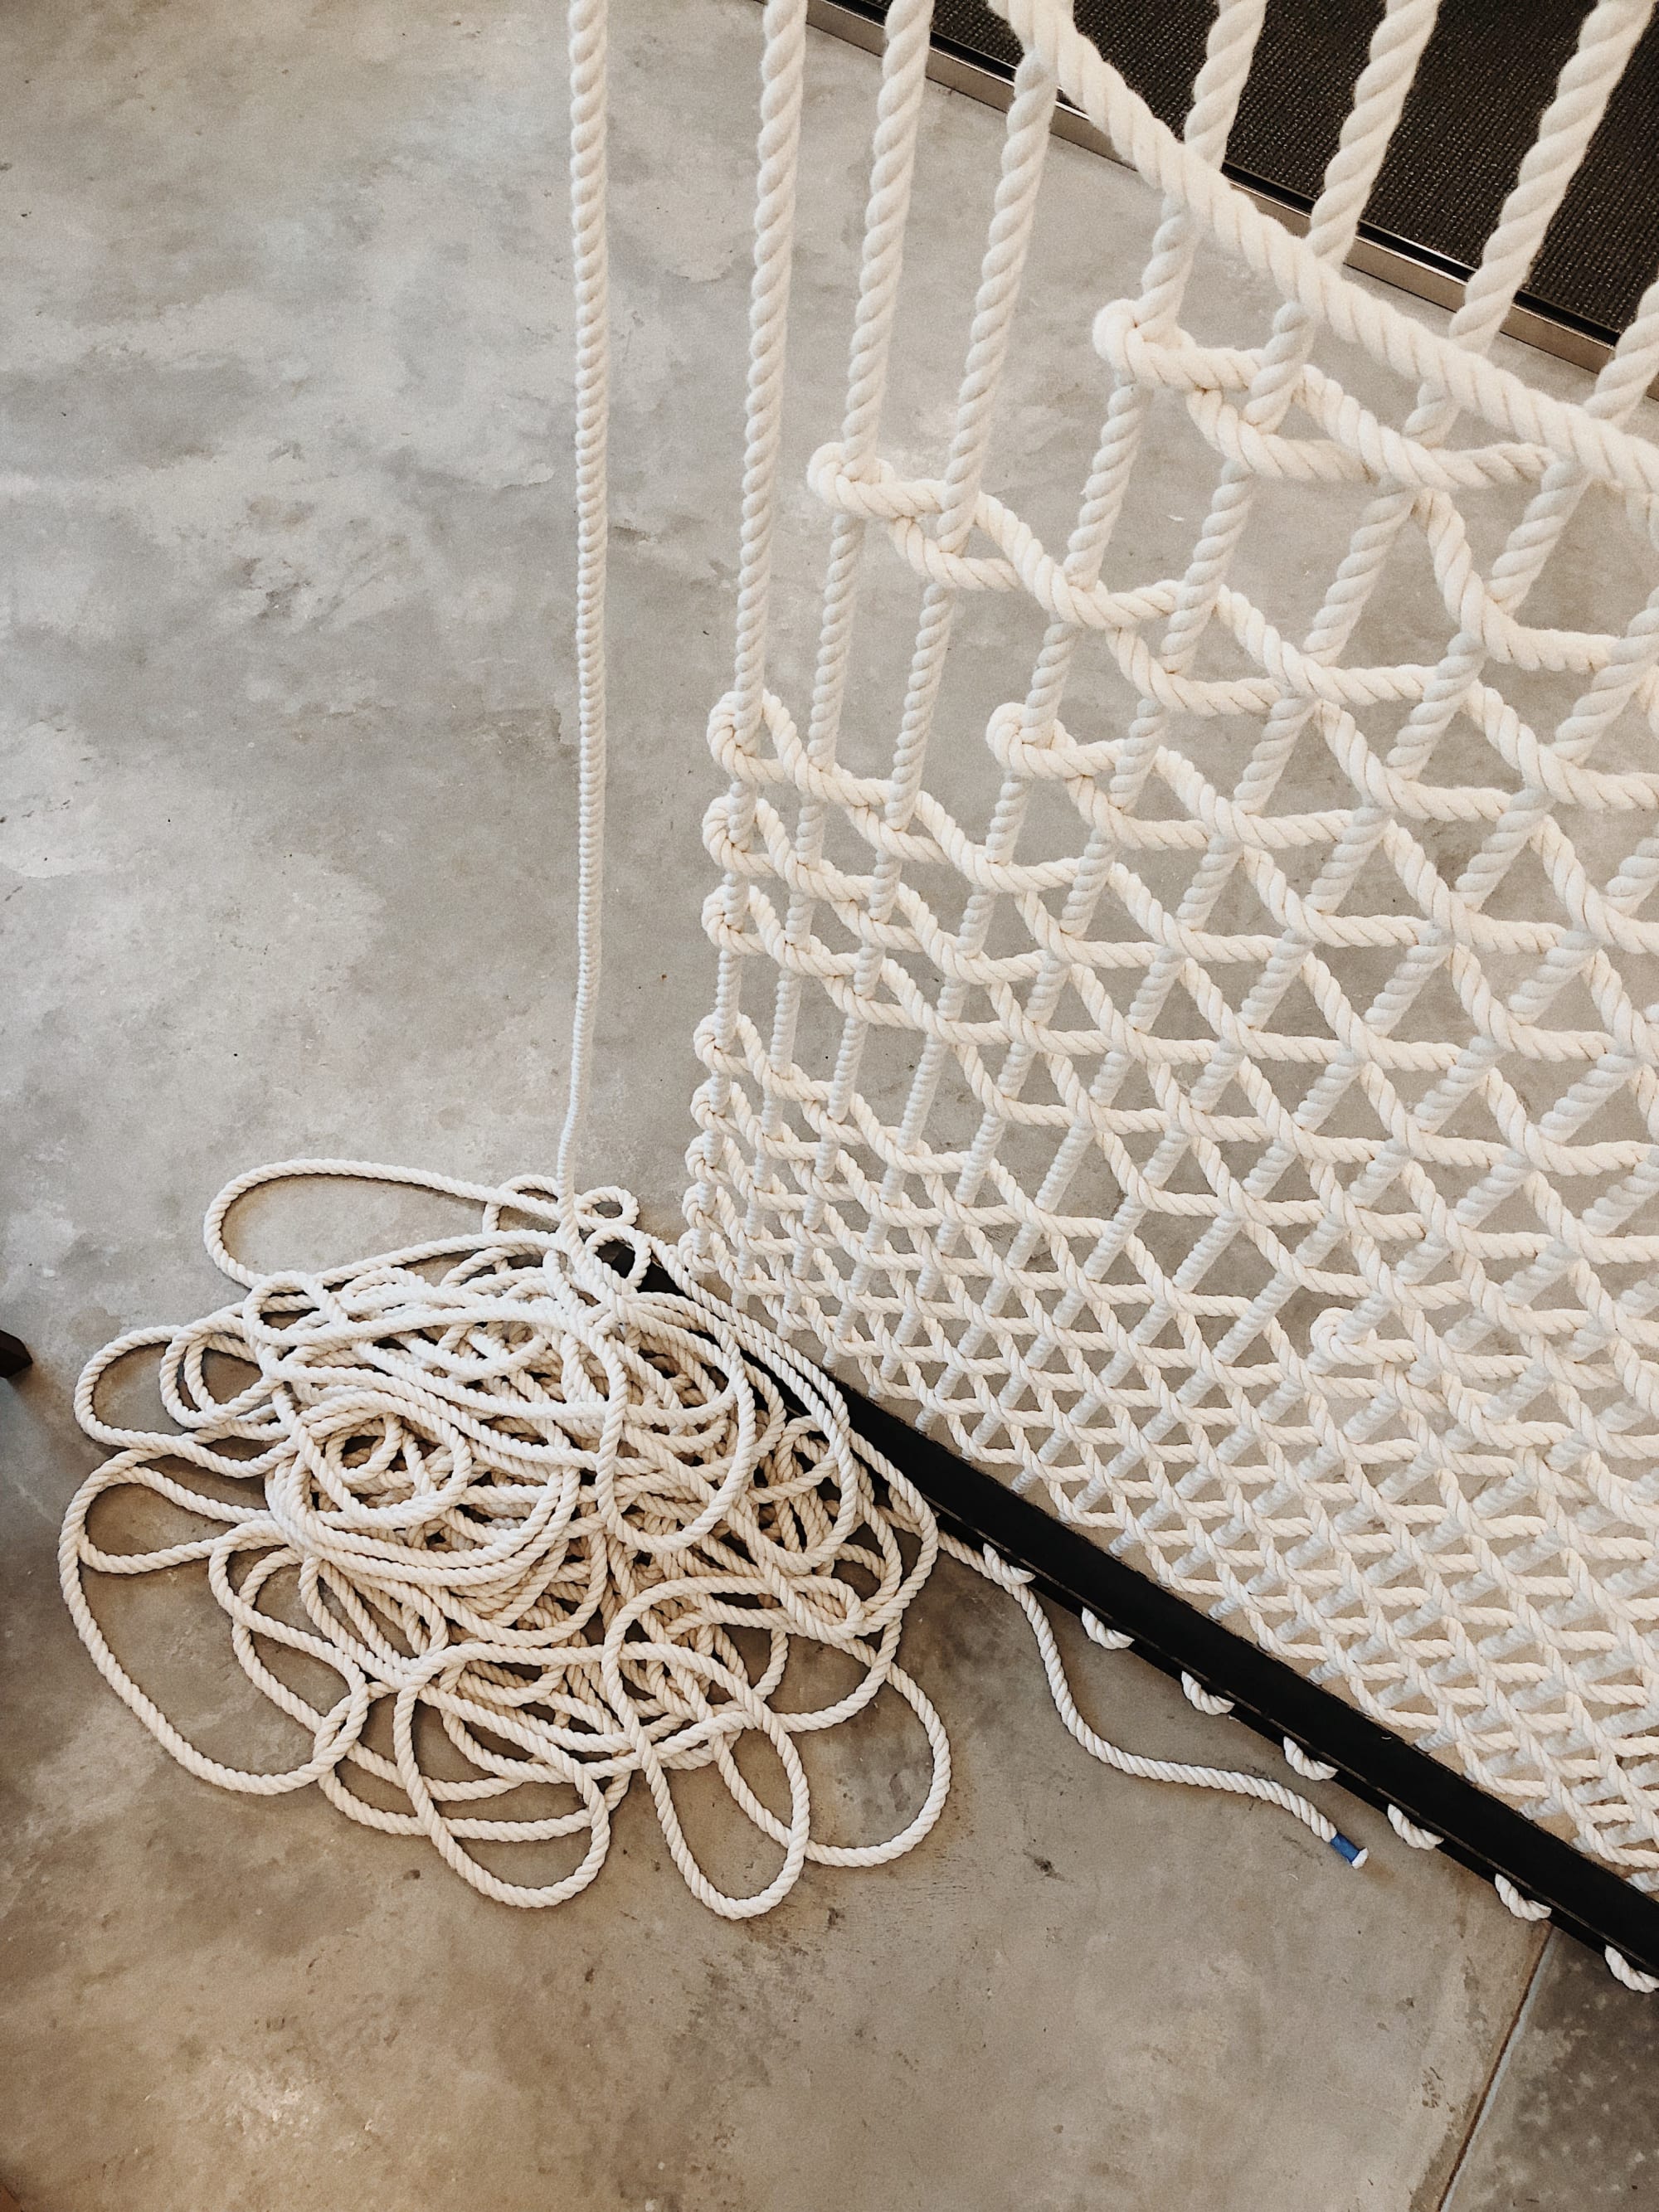 Woven Rope Screen by FIBROUS at IA, Interior Architects, Austin